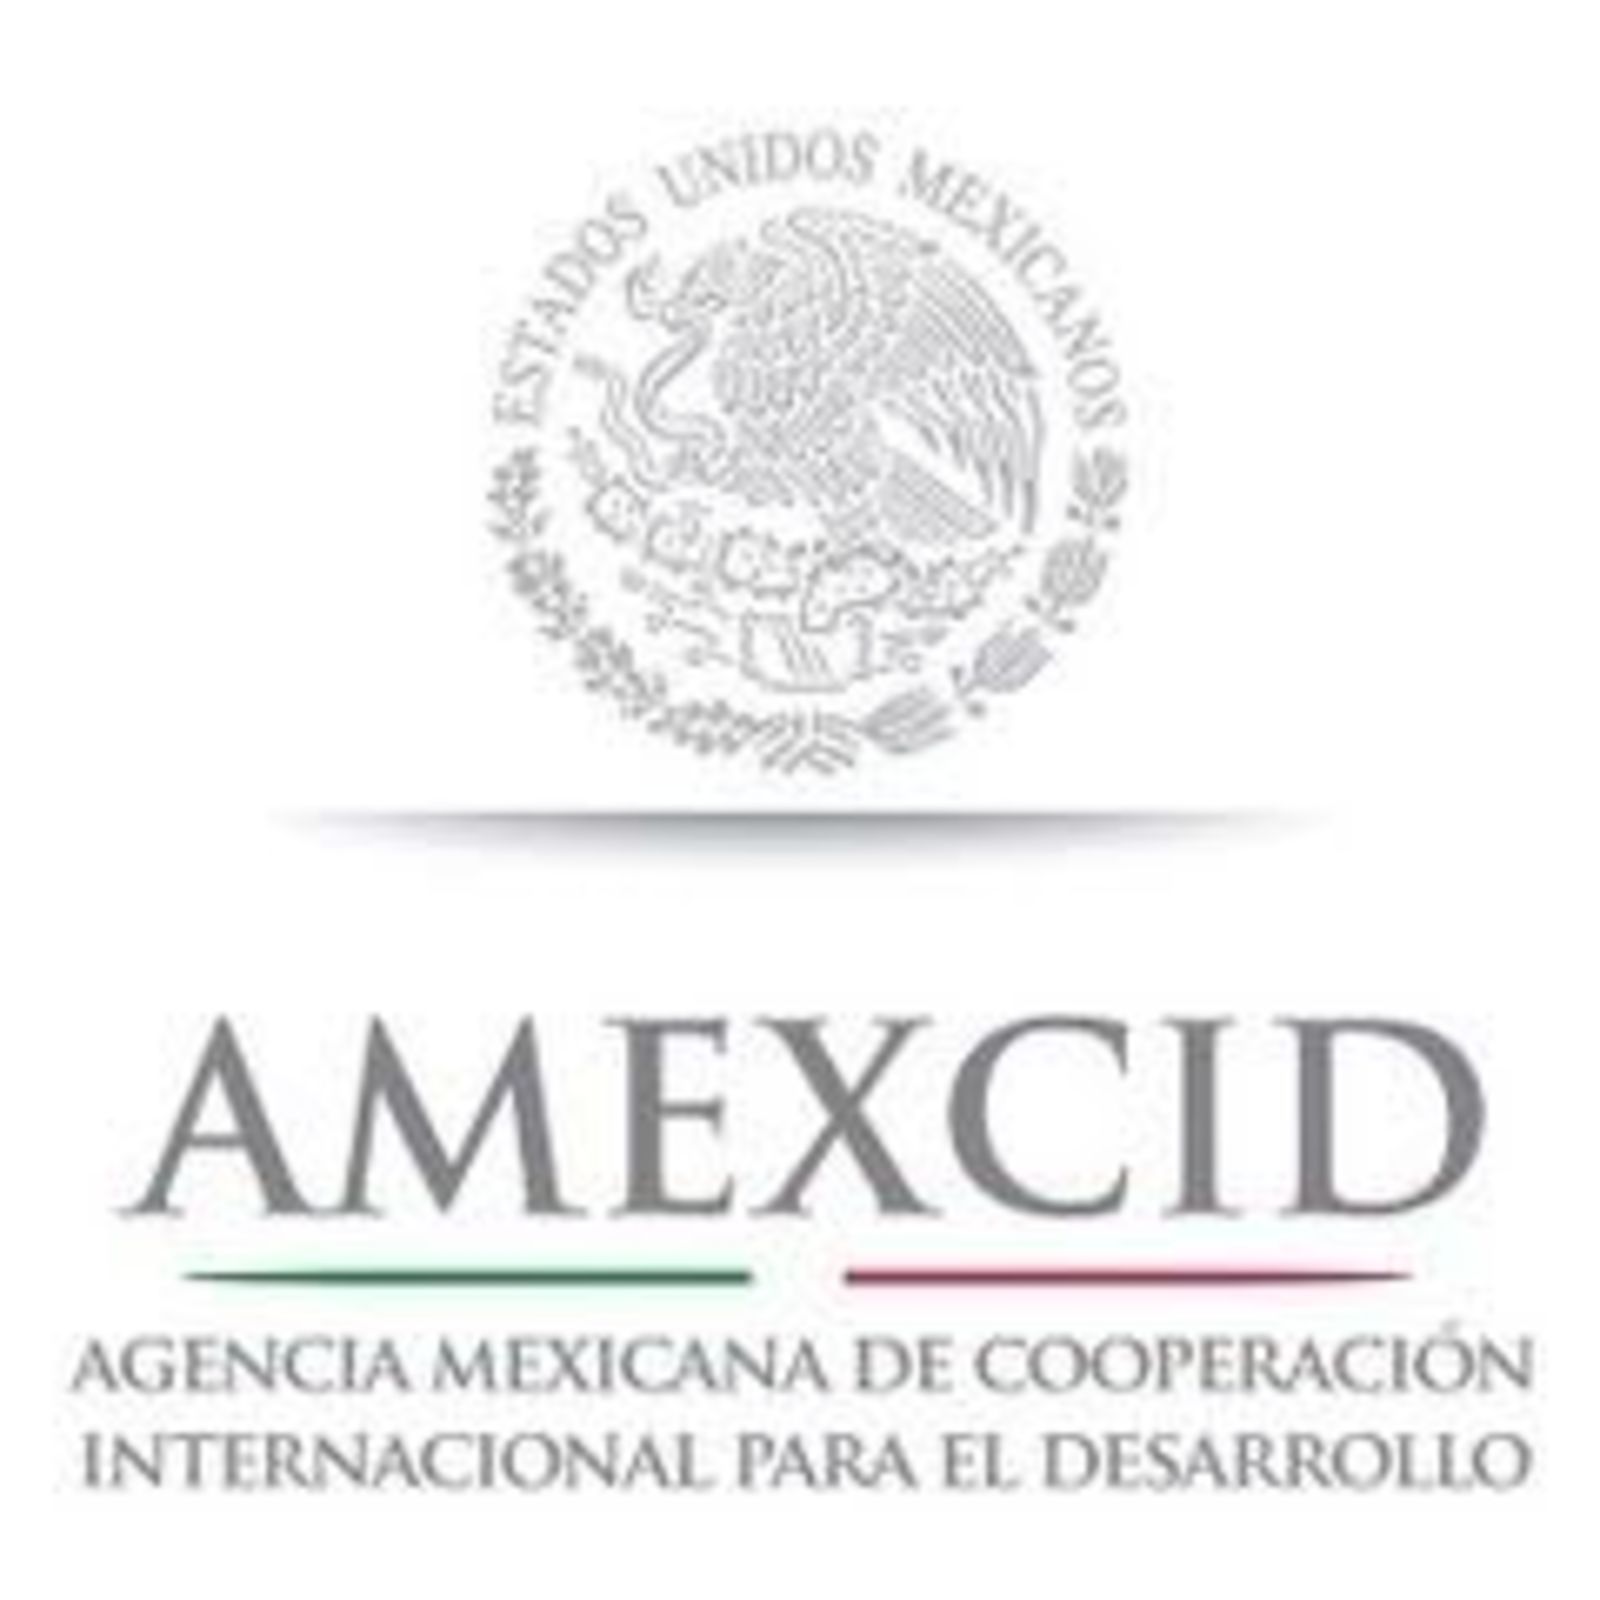 Open Proposal for Scholarships by the Mexian Agency for International Scientific Collaboration